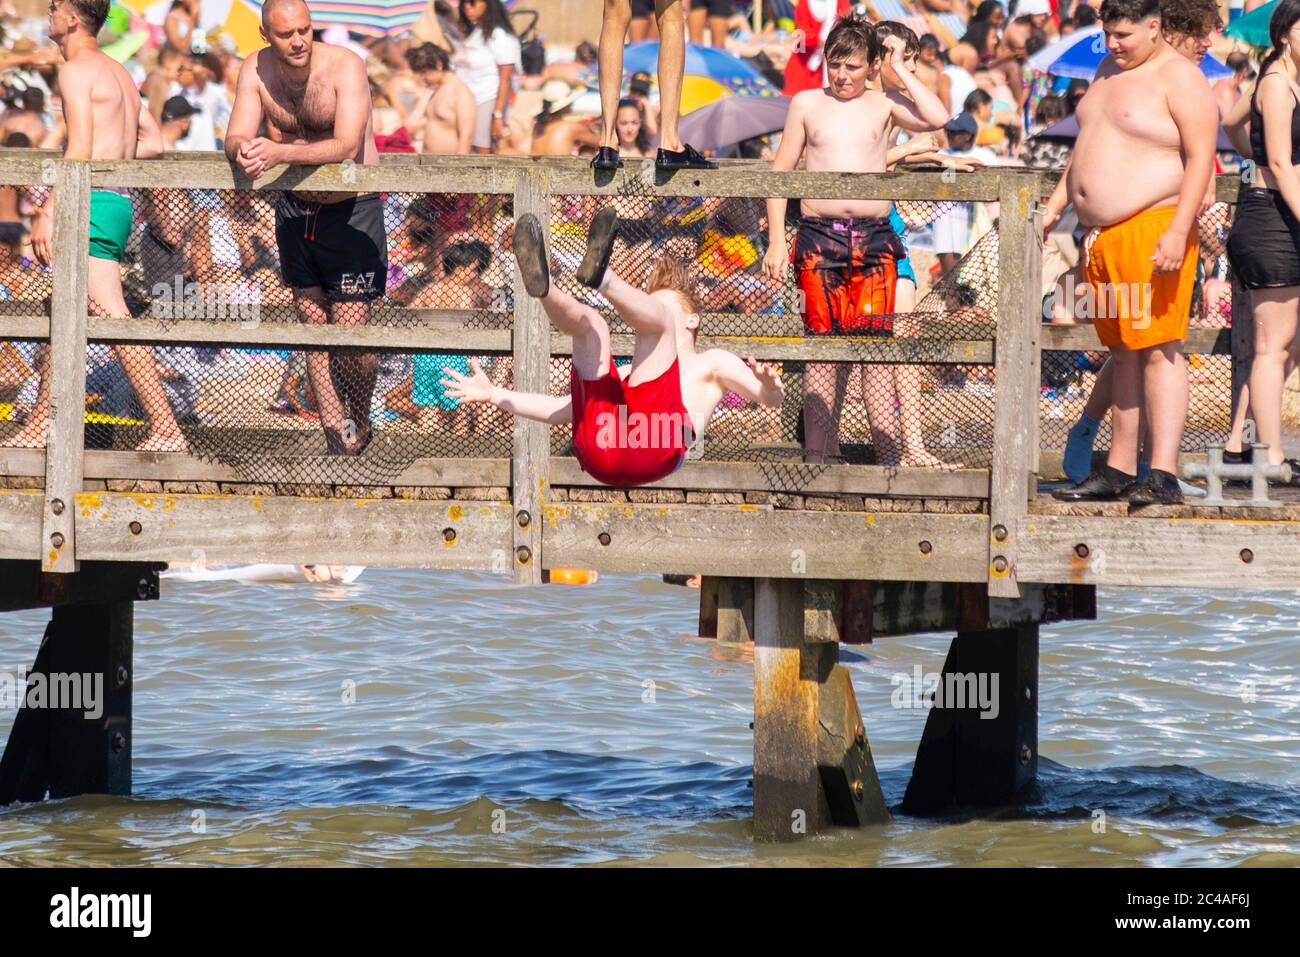 Southend on Sea, Essex, UK. 25th Jun, 2020. With the forecast record temperatures for 2020 people are heading to the seafront to cool down, despite the COVID-19 Coronavirus advice. In Southend on Sea the shore of the Thames Estuary is packed, with people swimming and jumping into the sea. White Caucasian male jumping into the sea from a wooden pier with packed beach beyond Stock Photo